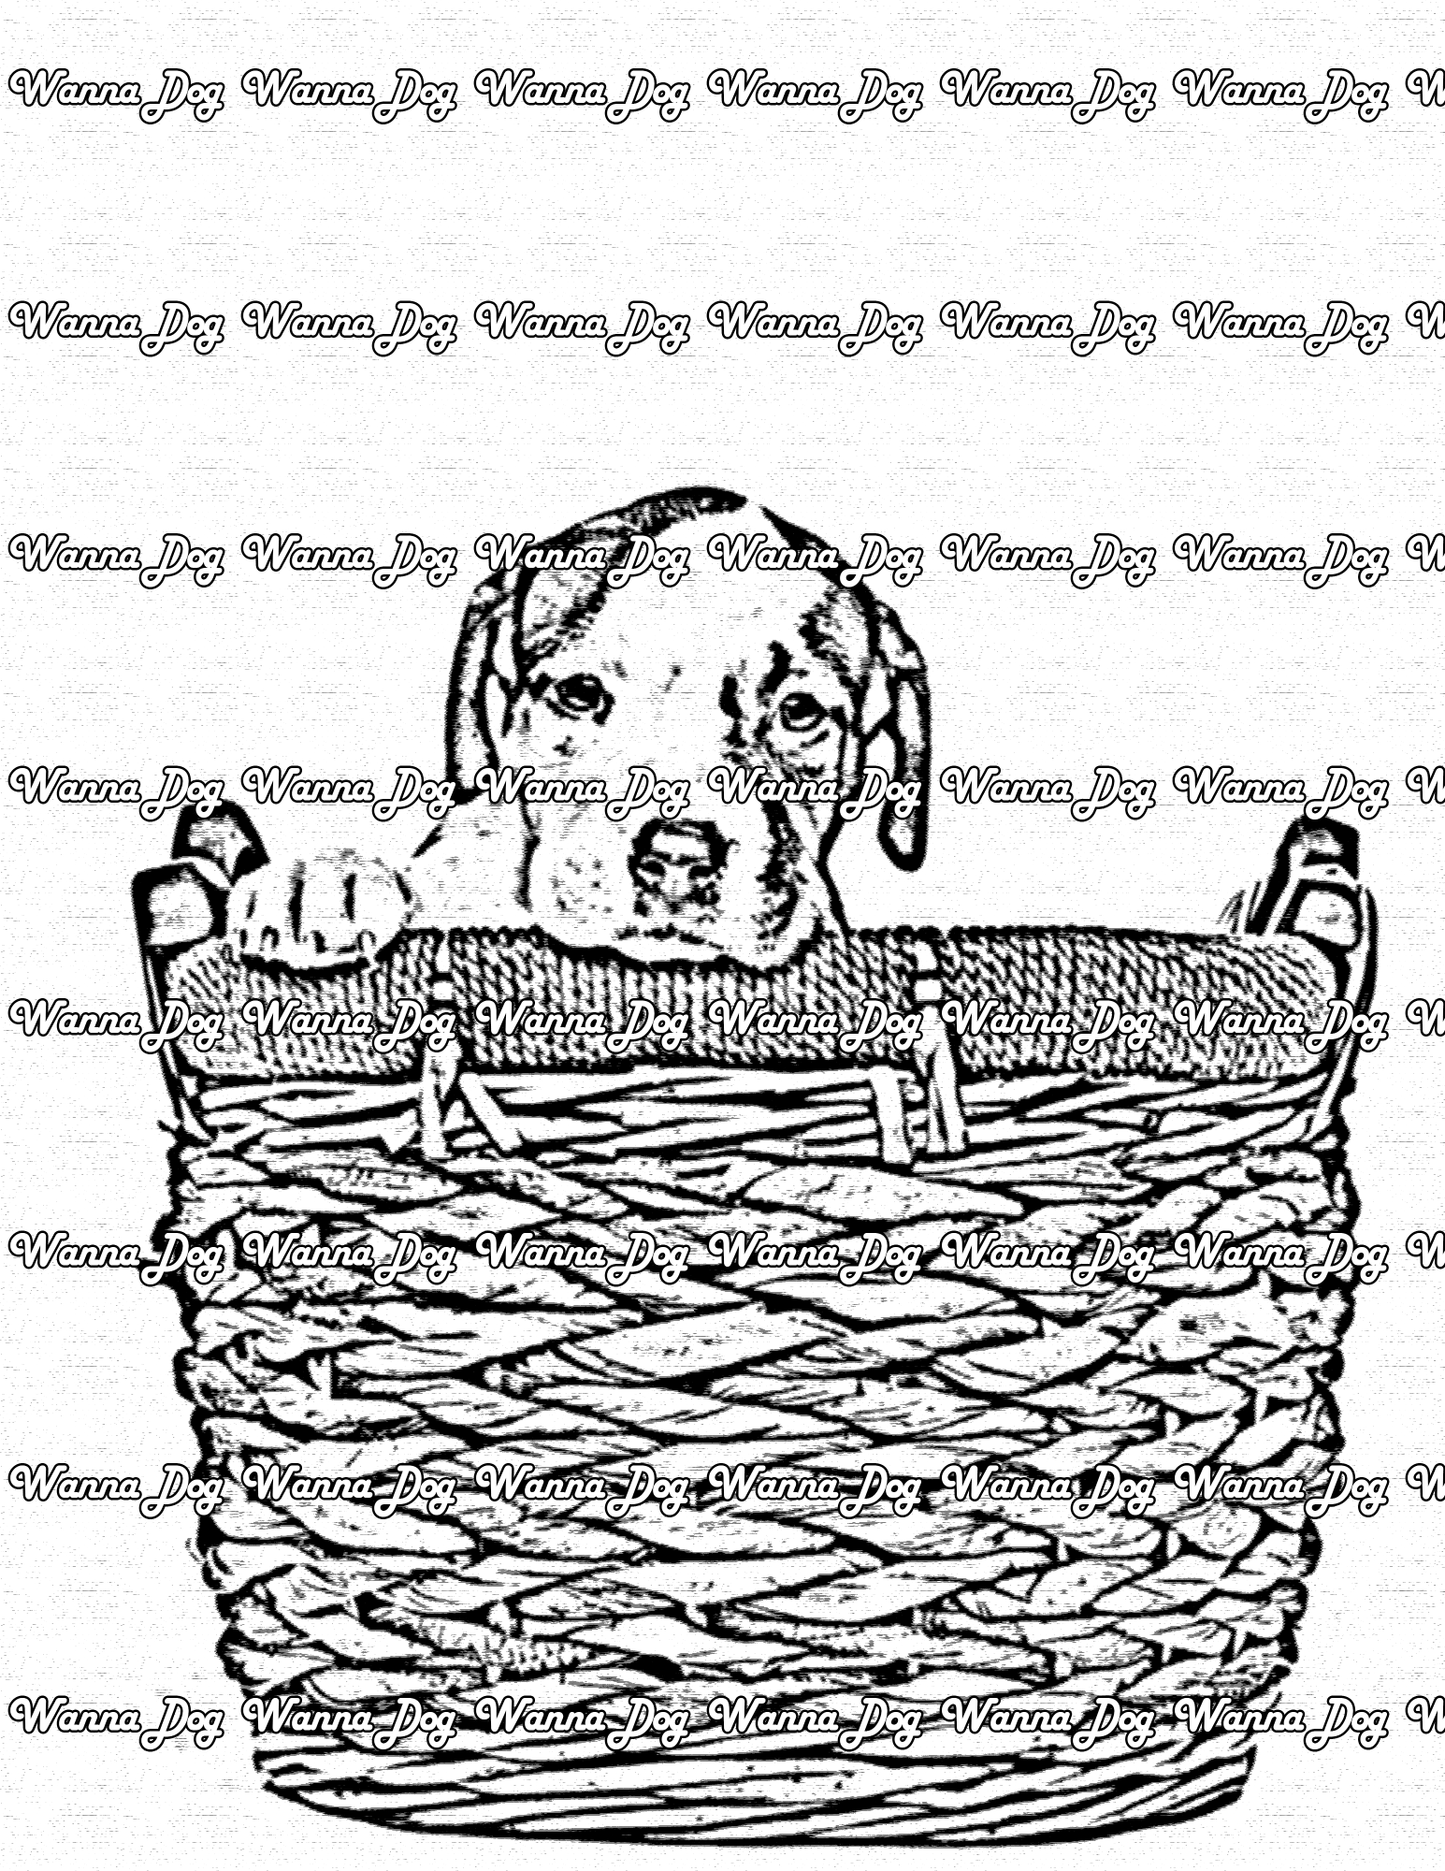 Pitbull Puppy Coloring Page of a Pitbull Puppy sitting in a basket